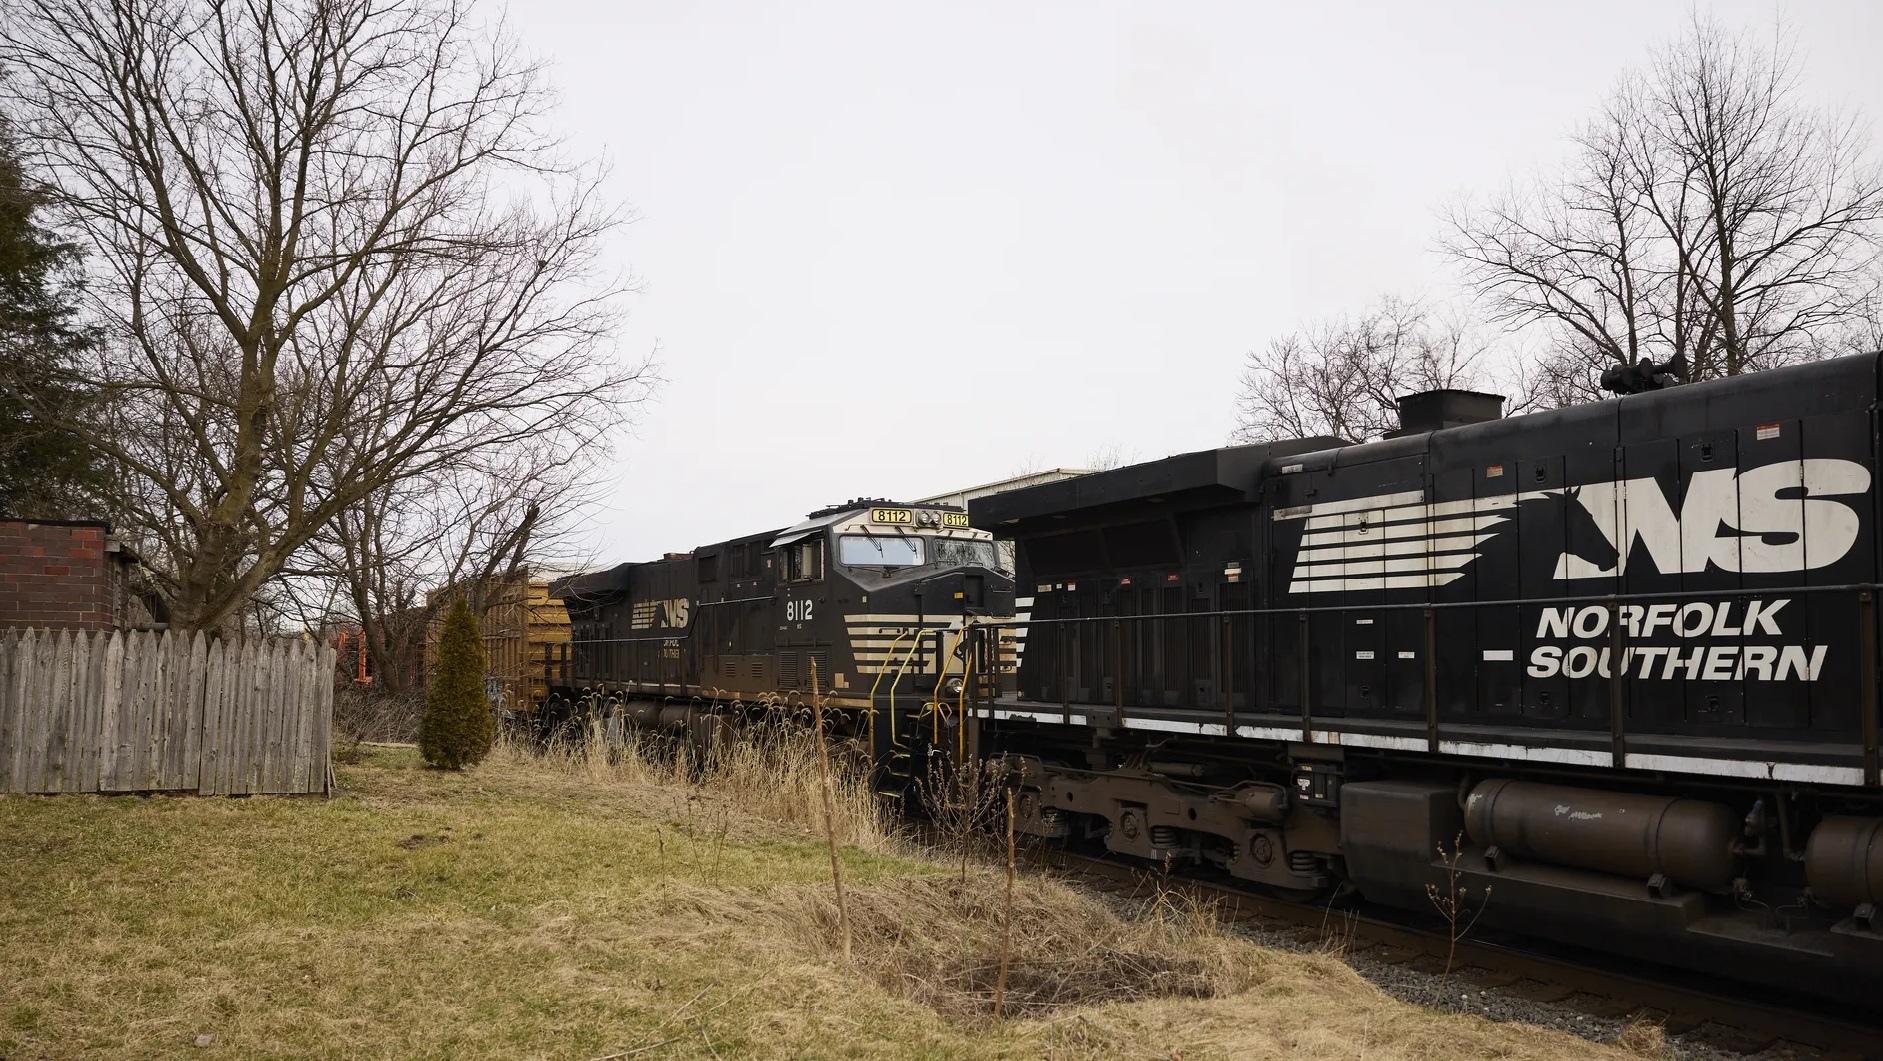 Ohio Sues Norford Southern Railroad Over East Palestine Derailment